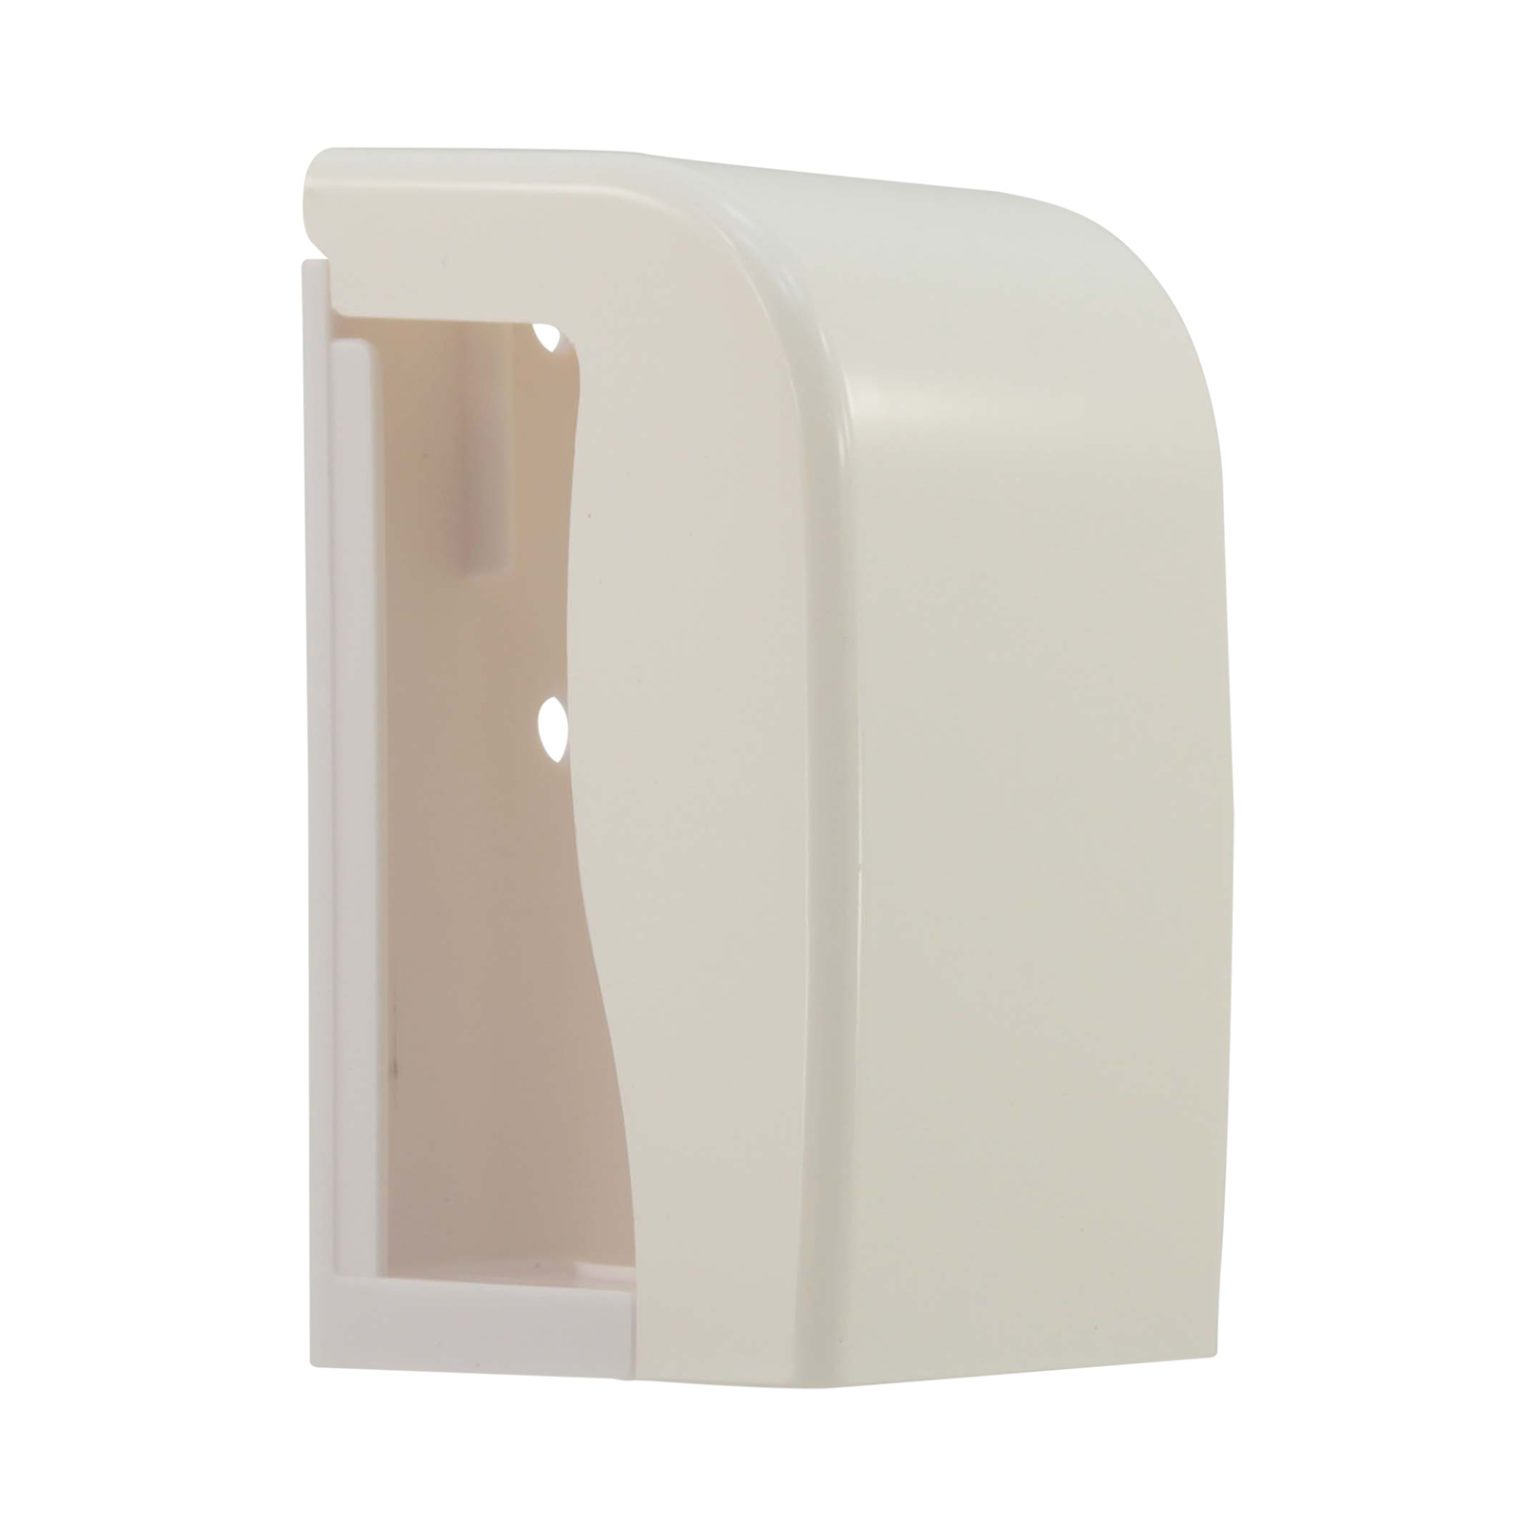 EcoScent-Passive-Air -Fragrance-System-Dispenser-Angle